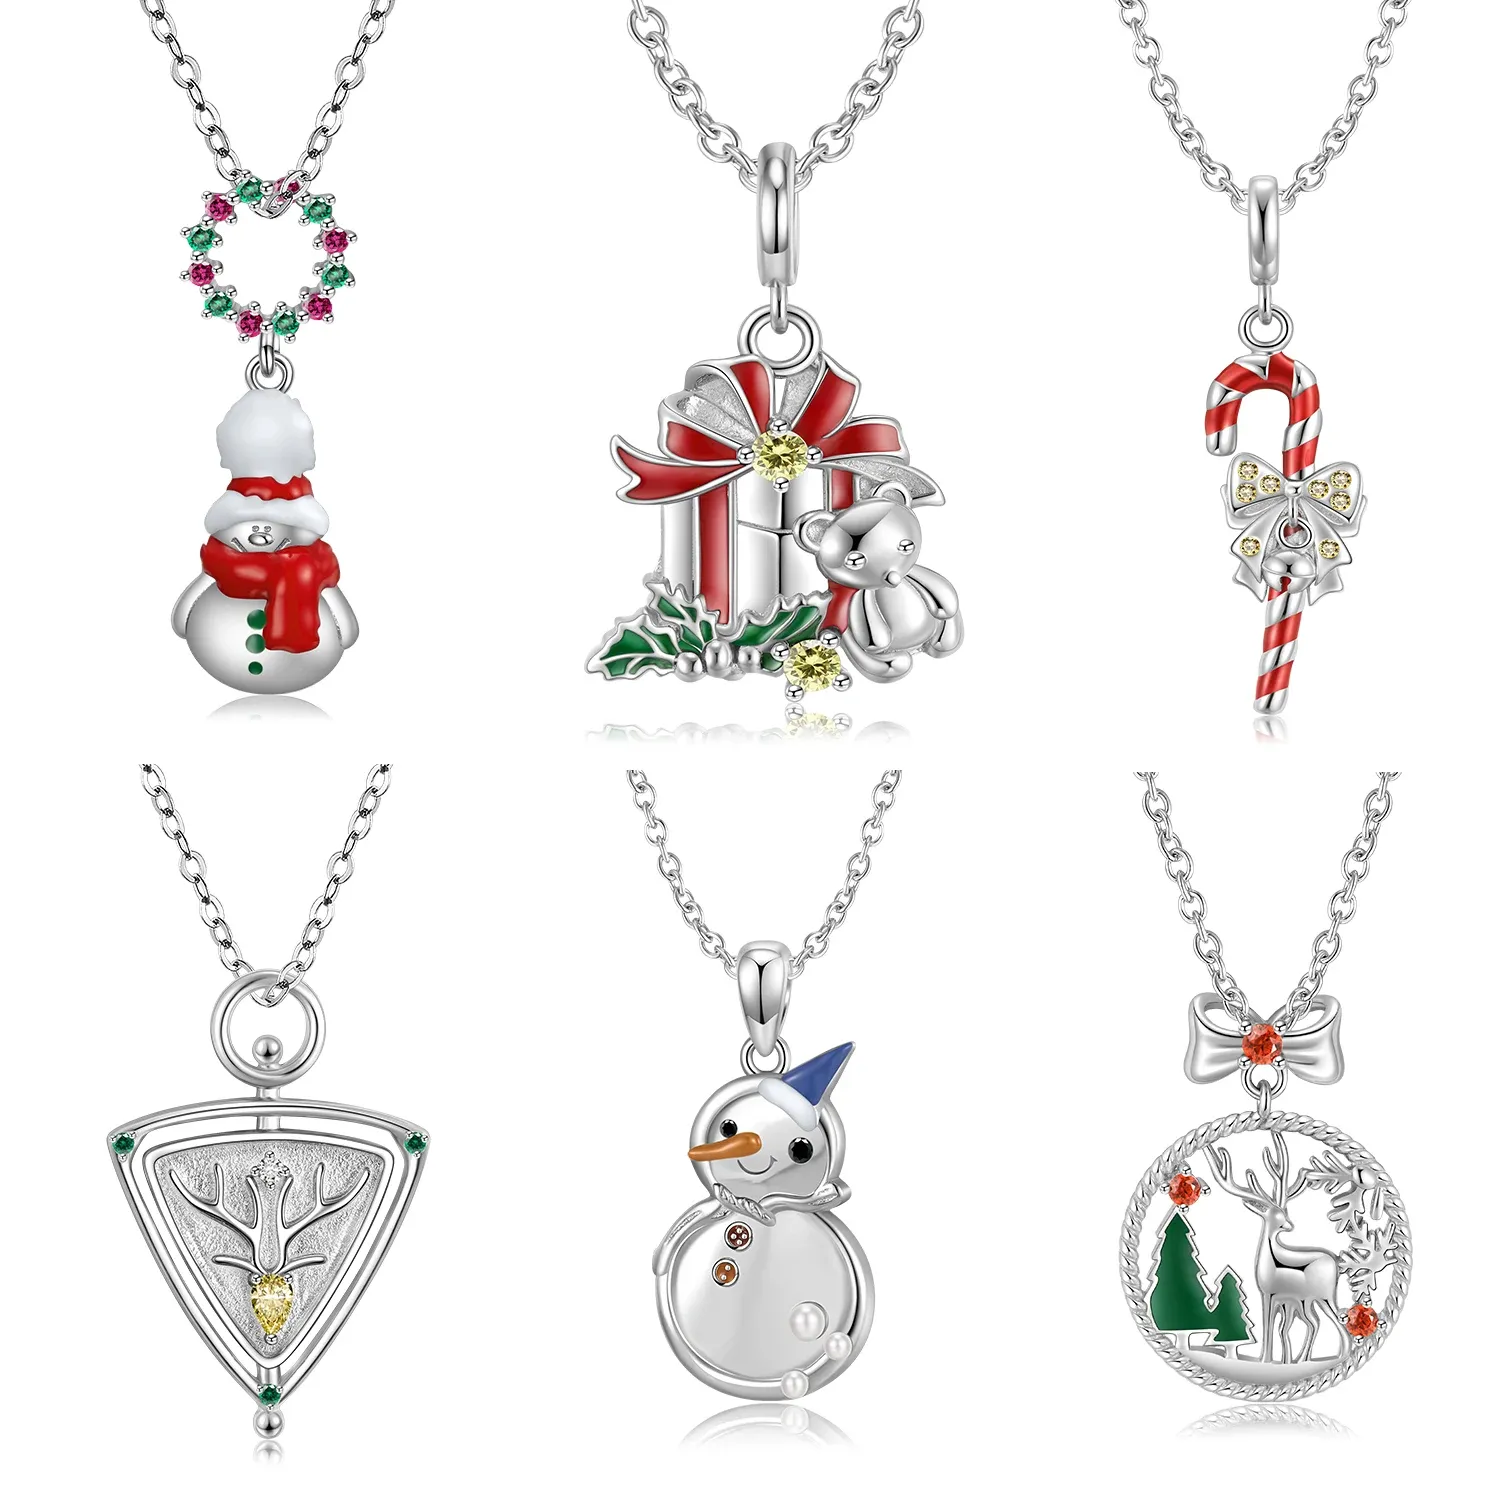 Necklace JIUHAO 925 Sterling Silver Snowman Ribbon Cane Elk Pendant Christmas Gift Necklace Jewelry Necklace Chain Accessories